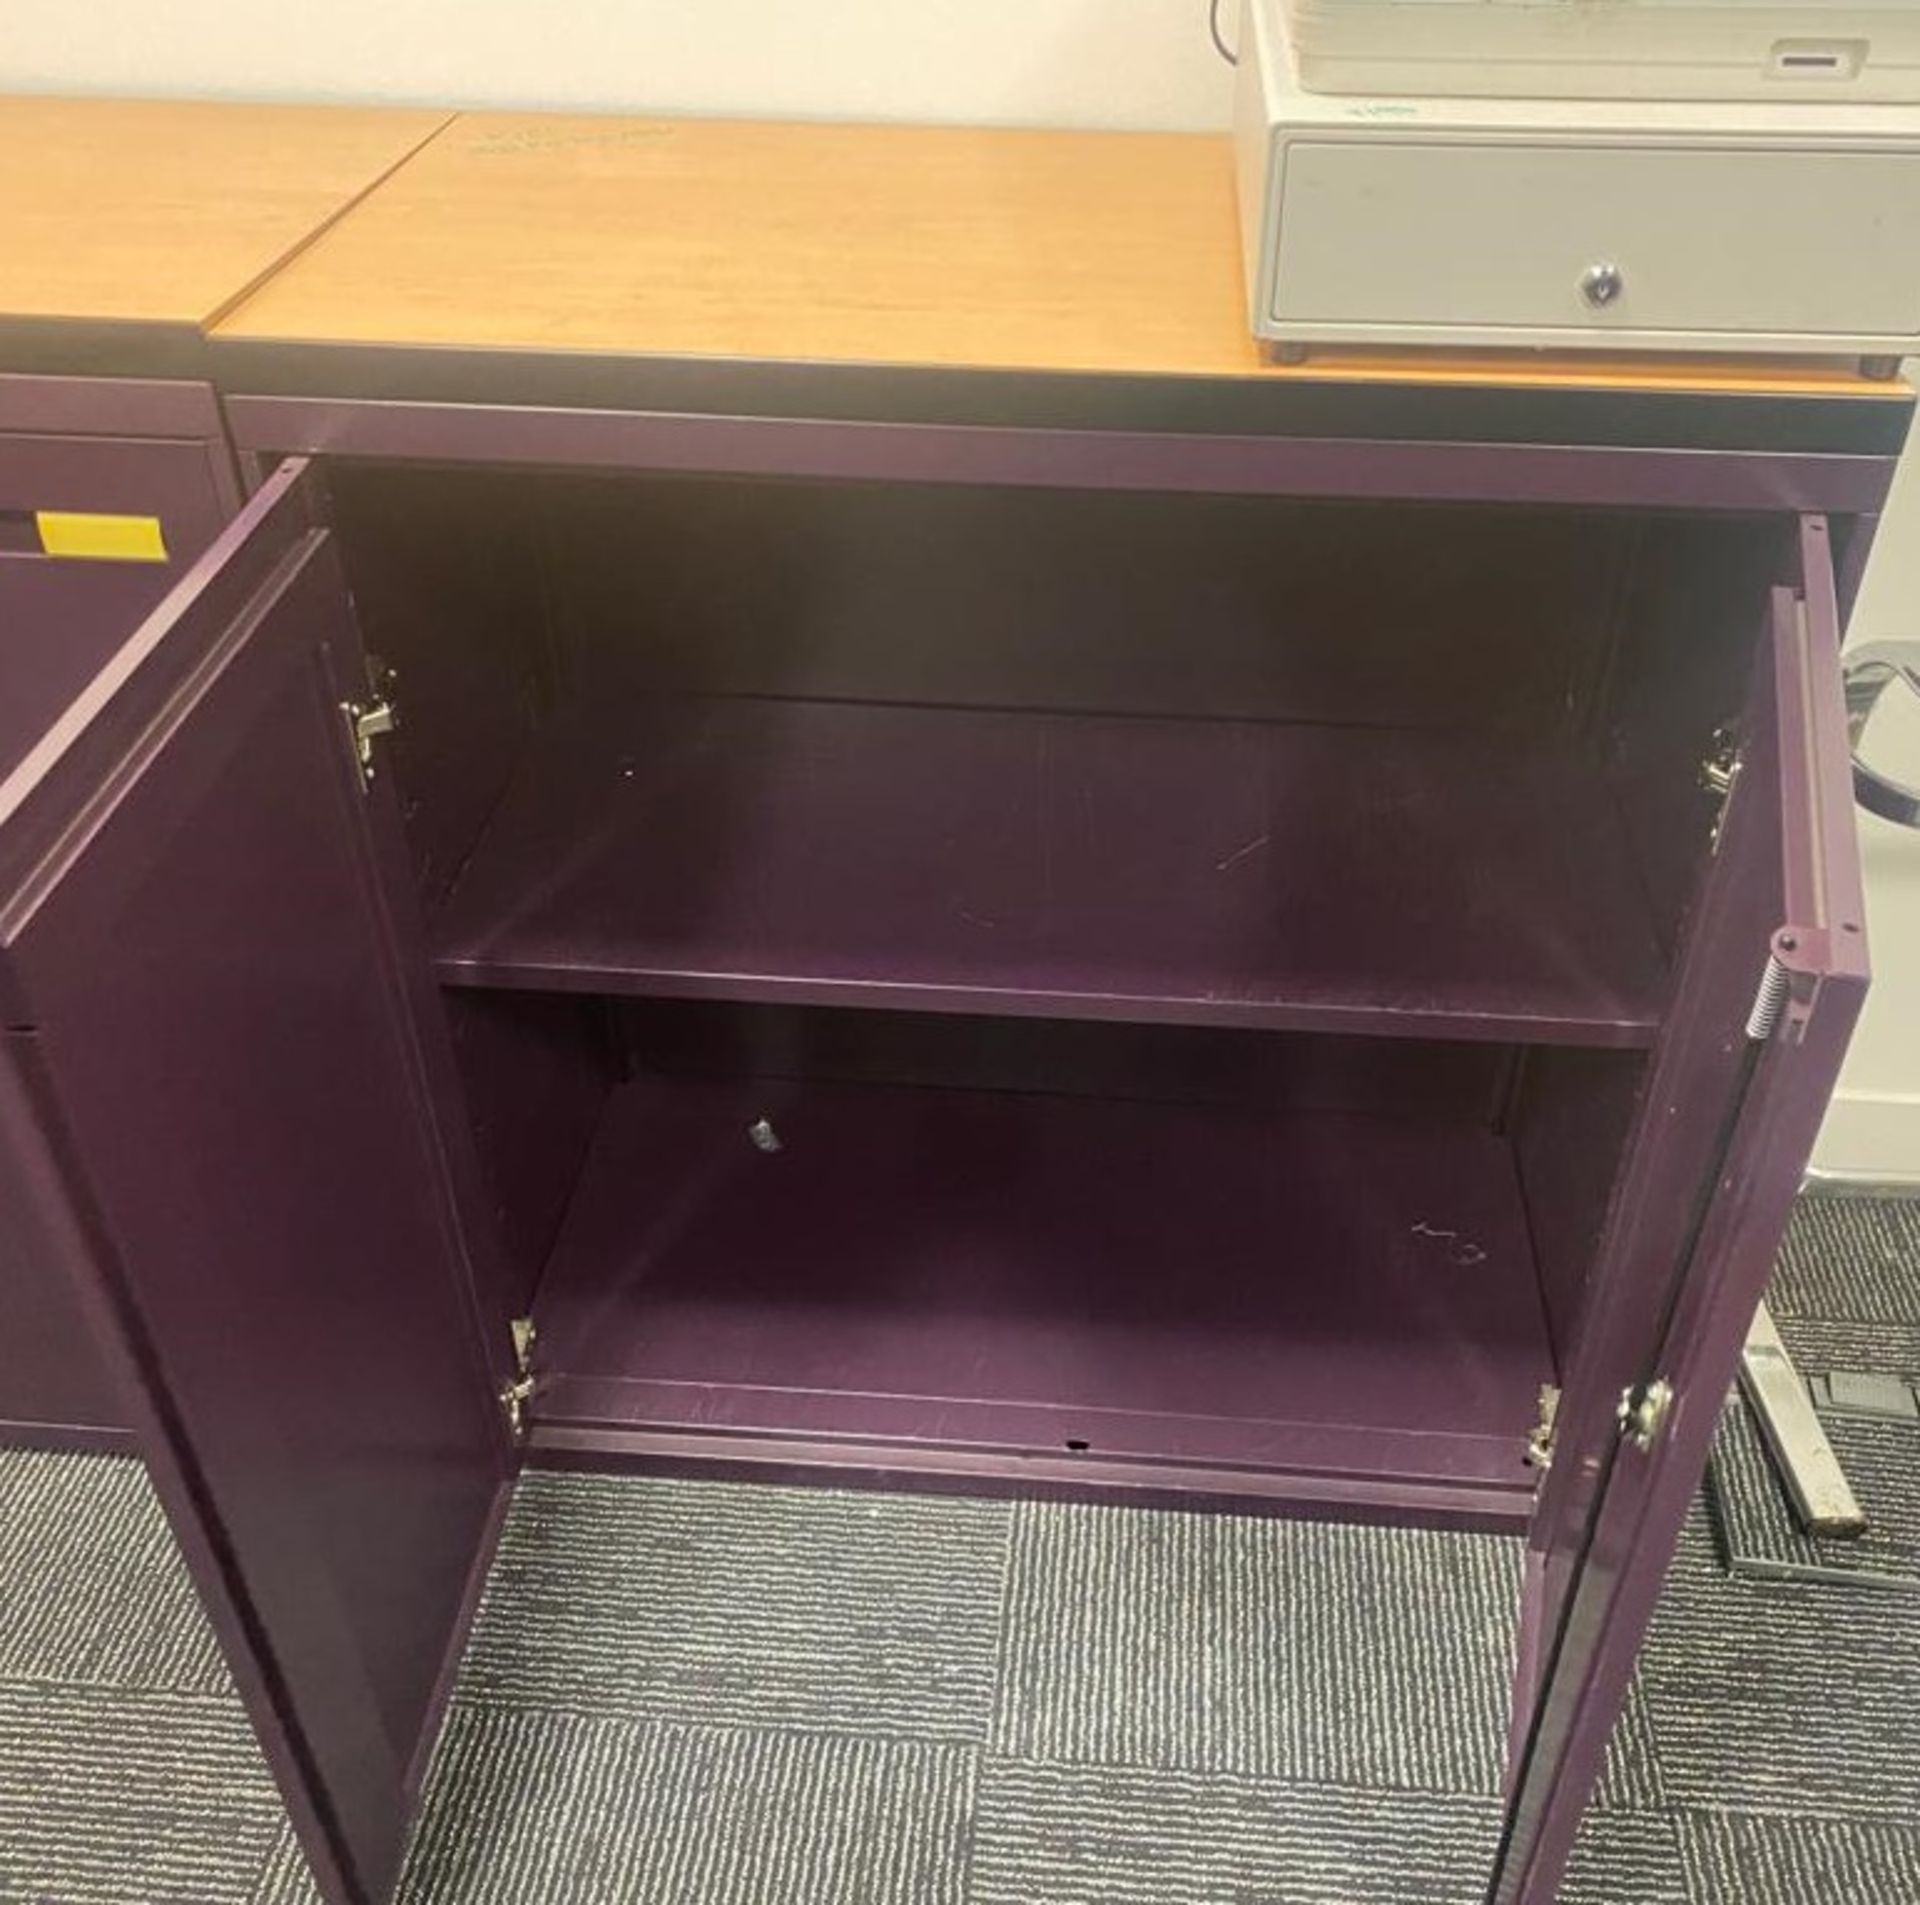 1 x Office Storage Cabinet For Files/Stationary - Features a Contemporary Purple Finish - Image 3 of 3